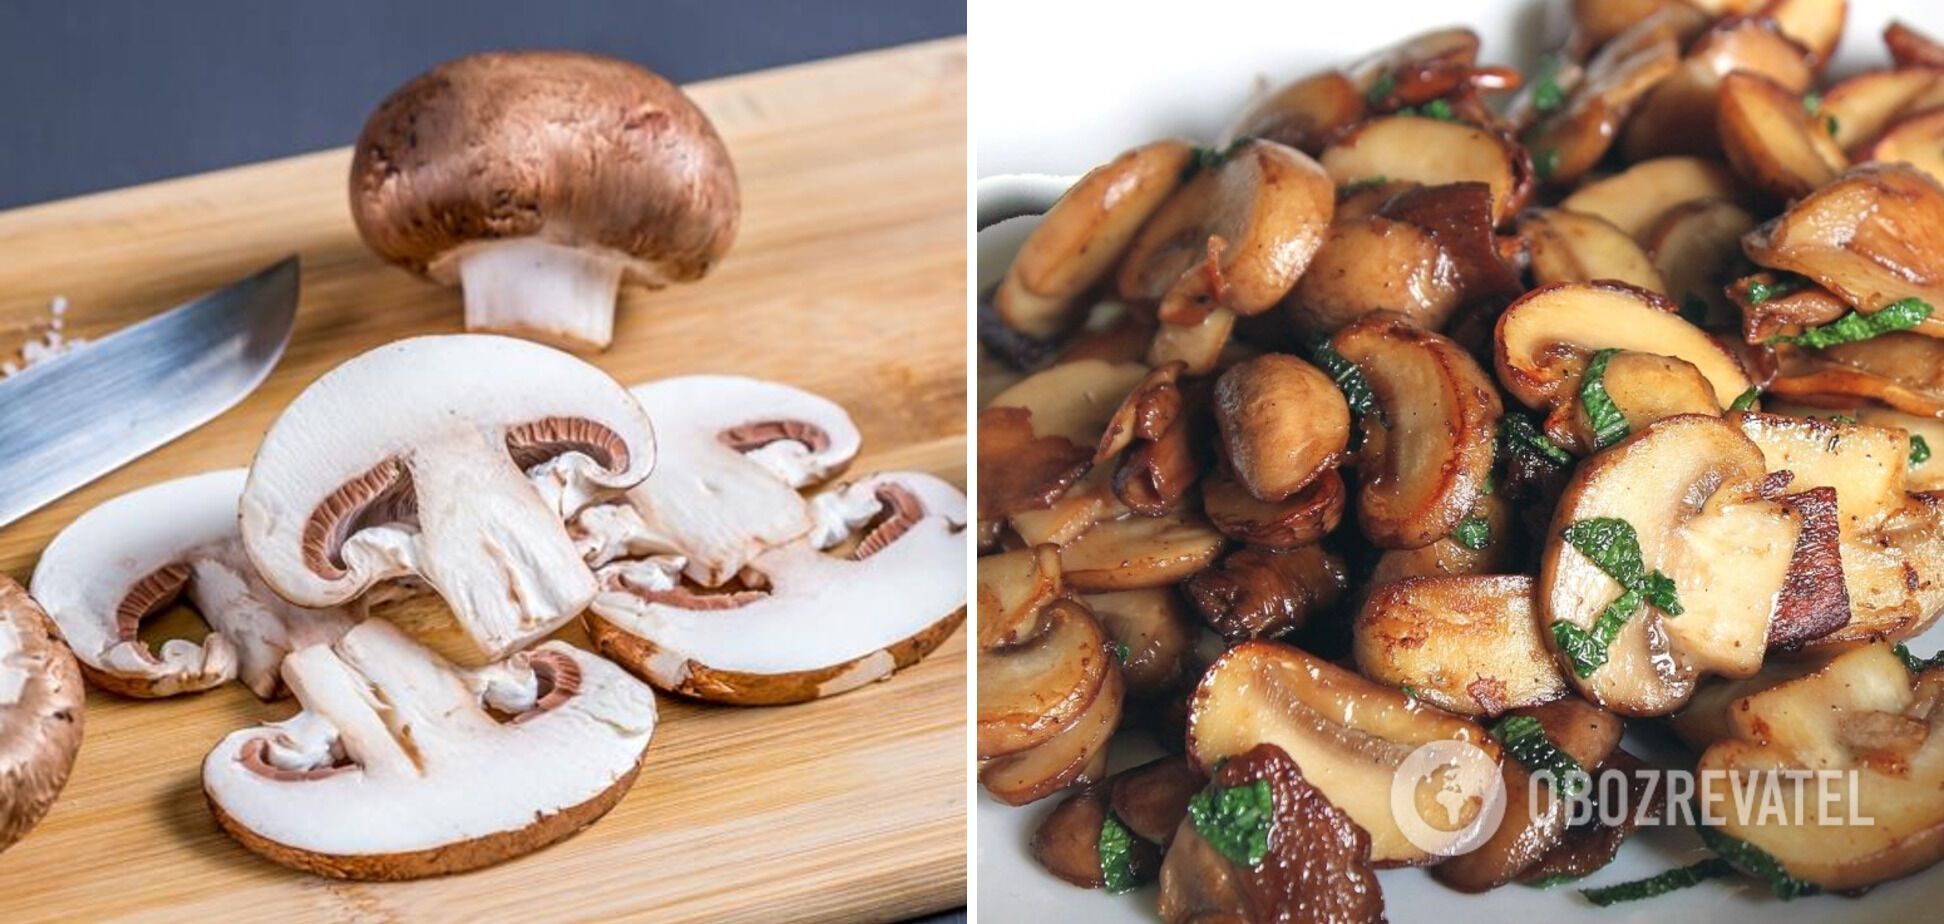 Mushrooms for the dish